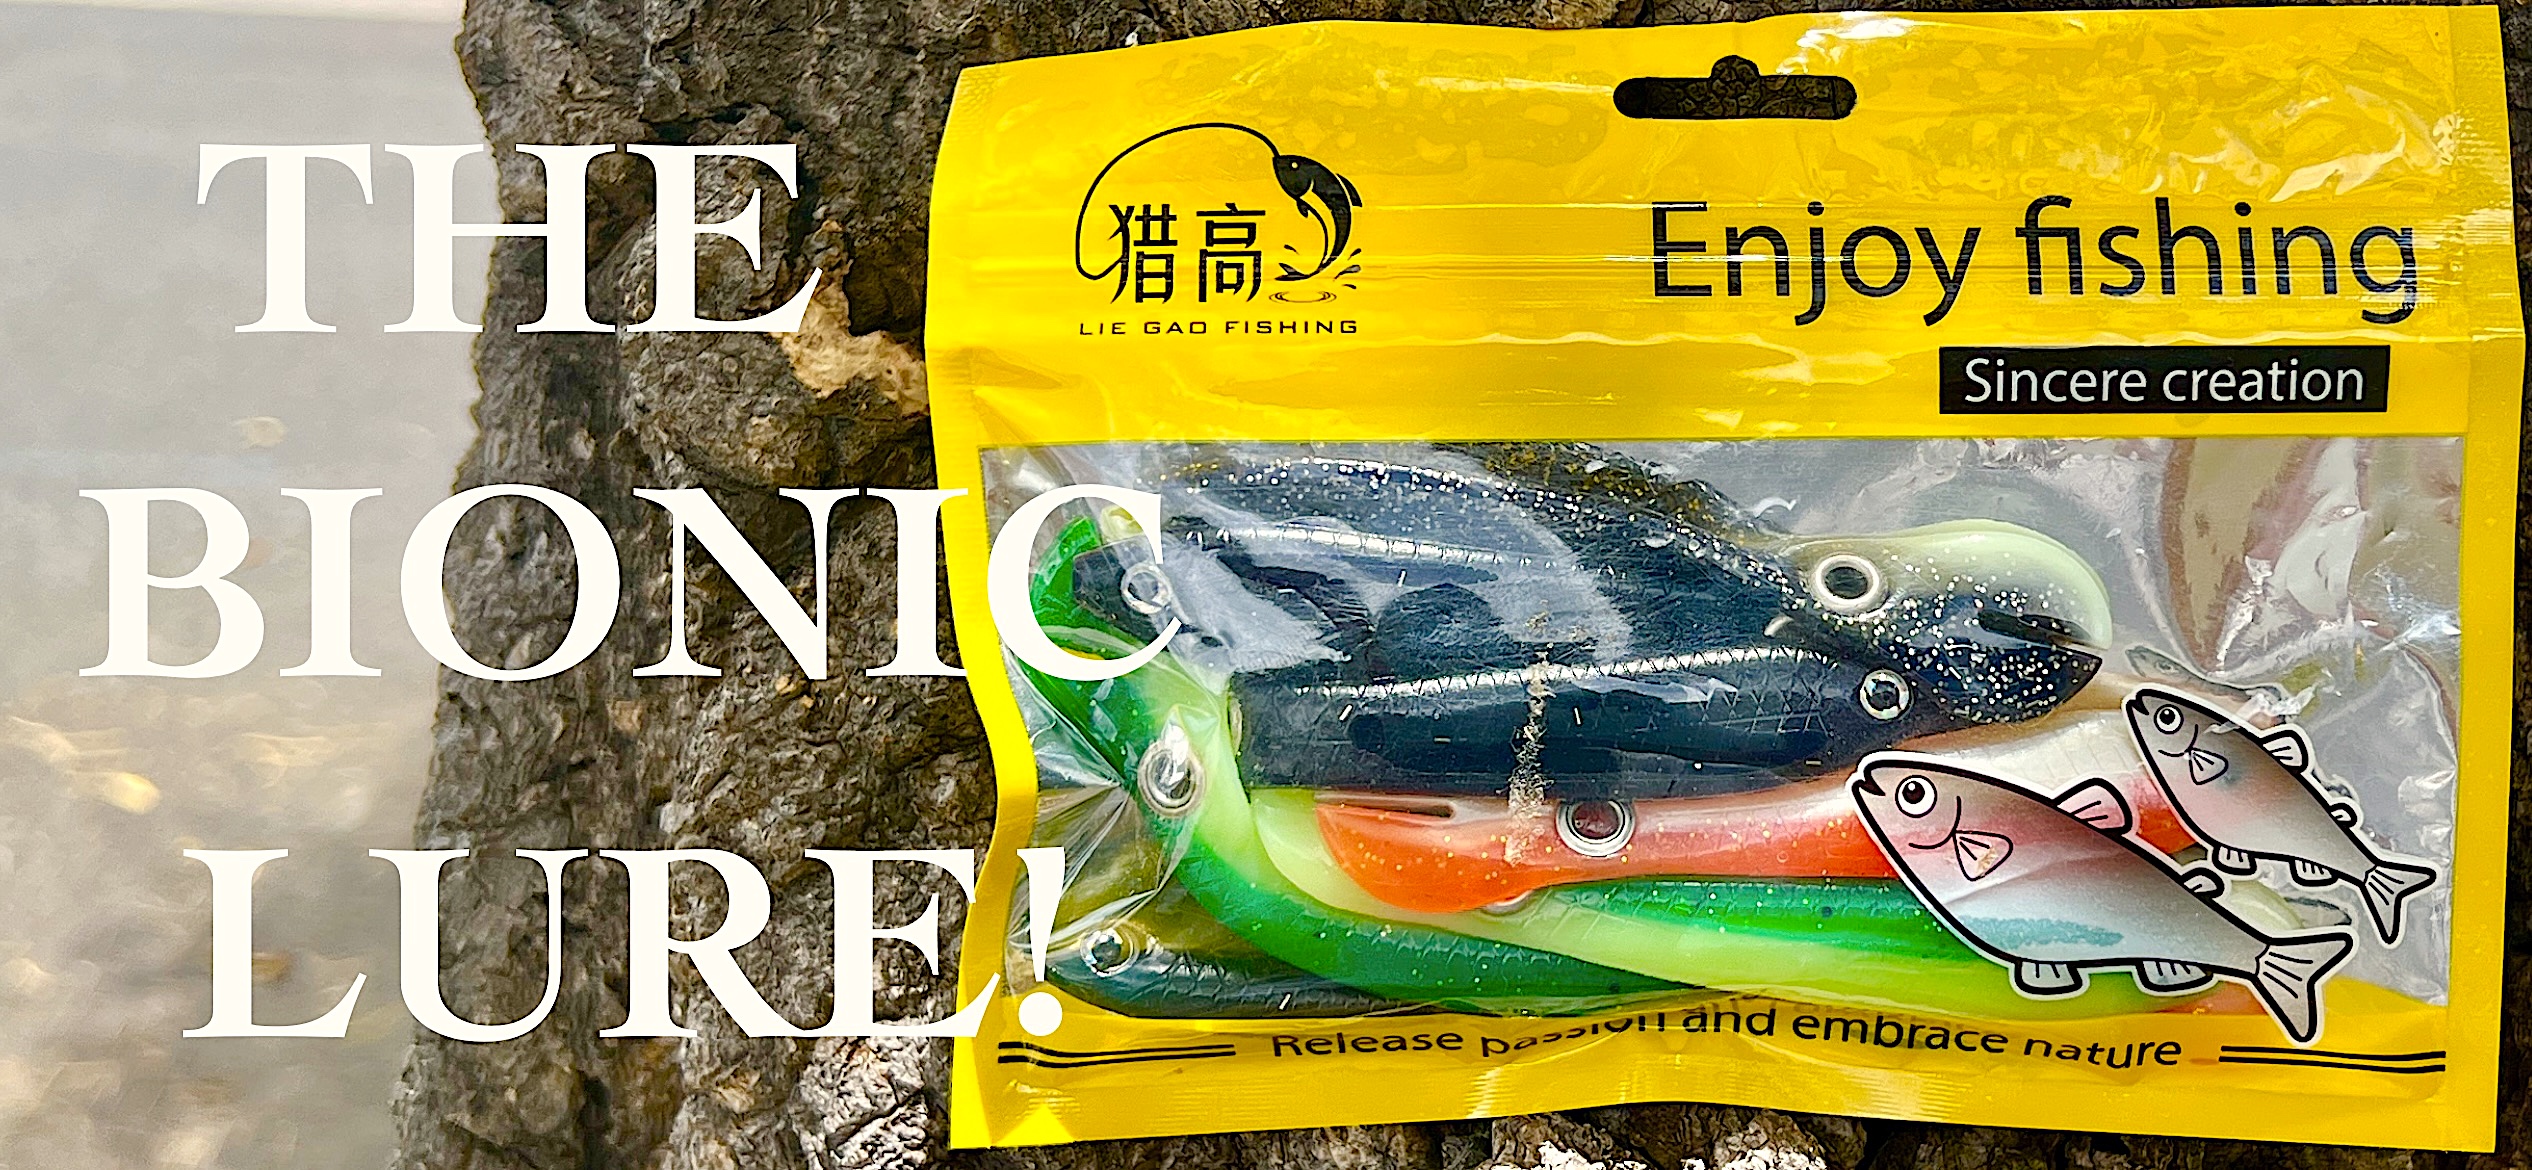 How To Rig A Soft Bionic Fishing Lure!